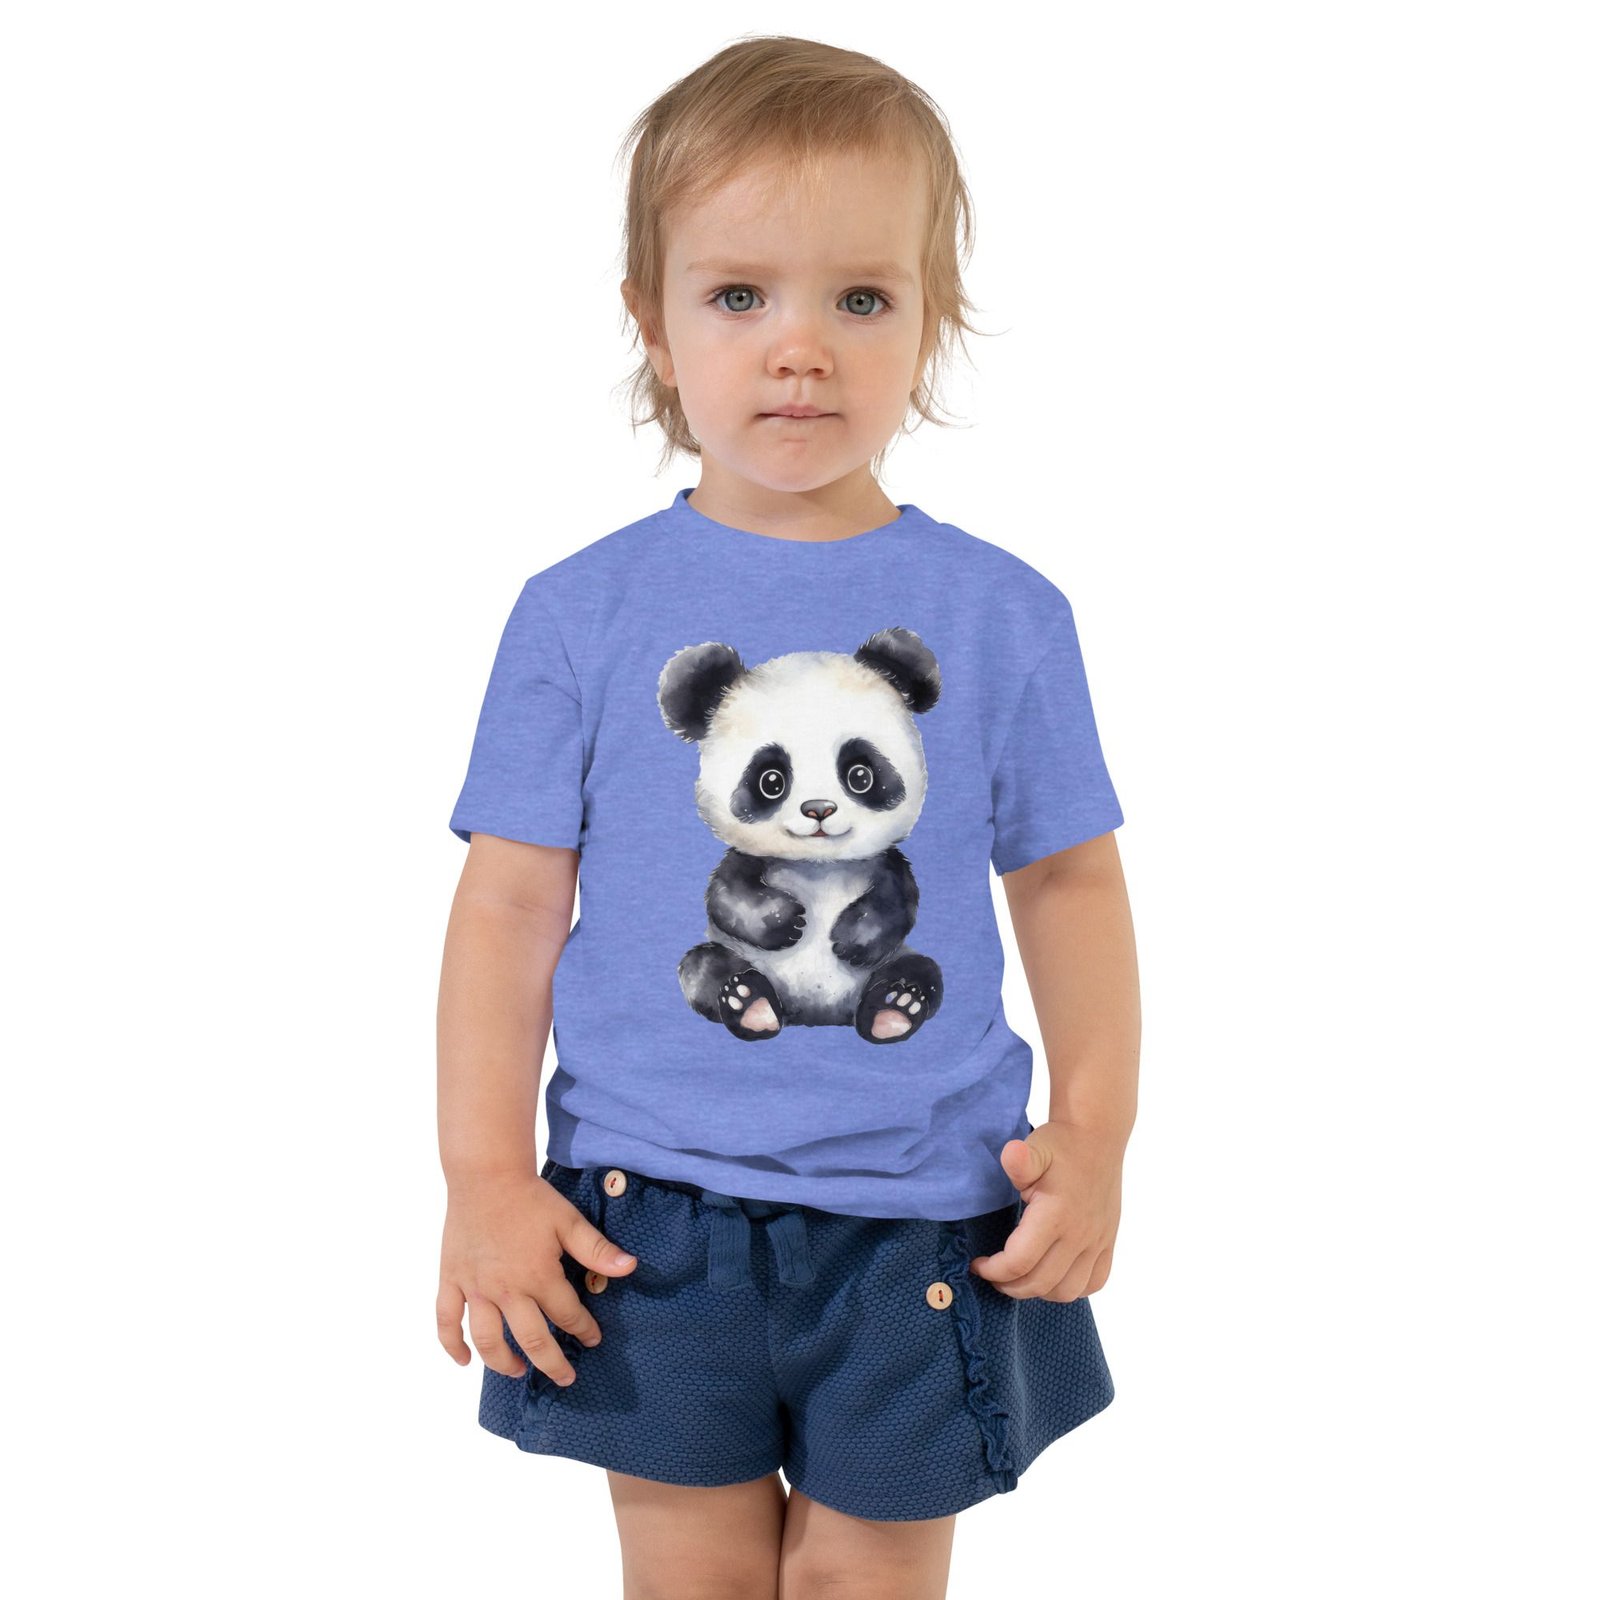 toddler staple tee heather columbia blue front 64c6bd0bbe35e